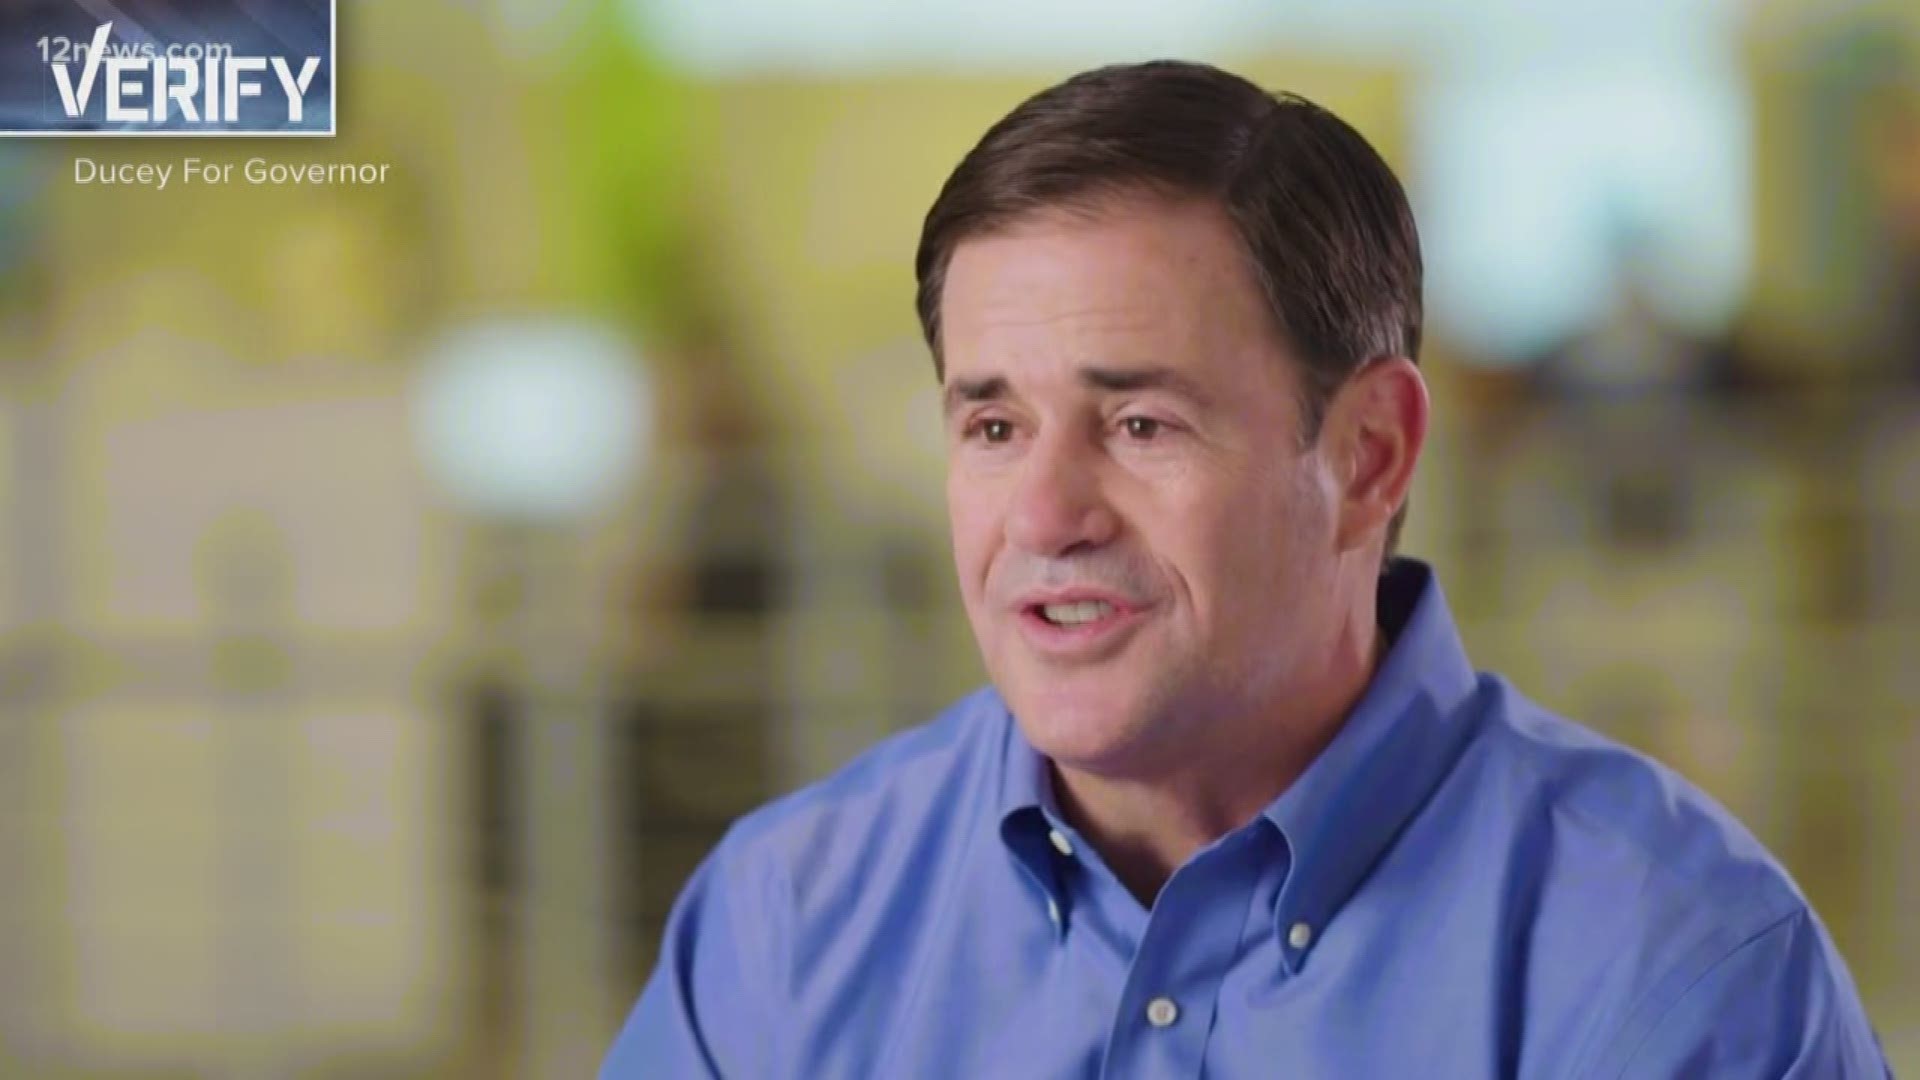 We look into the claims of success that Governor Ducey's new reelection ad make.